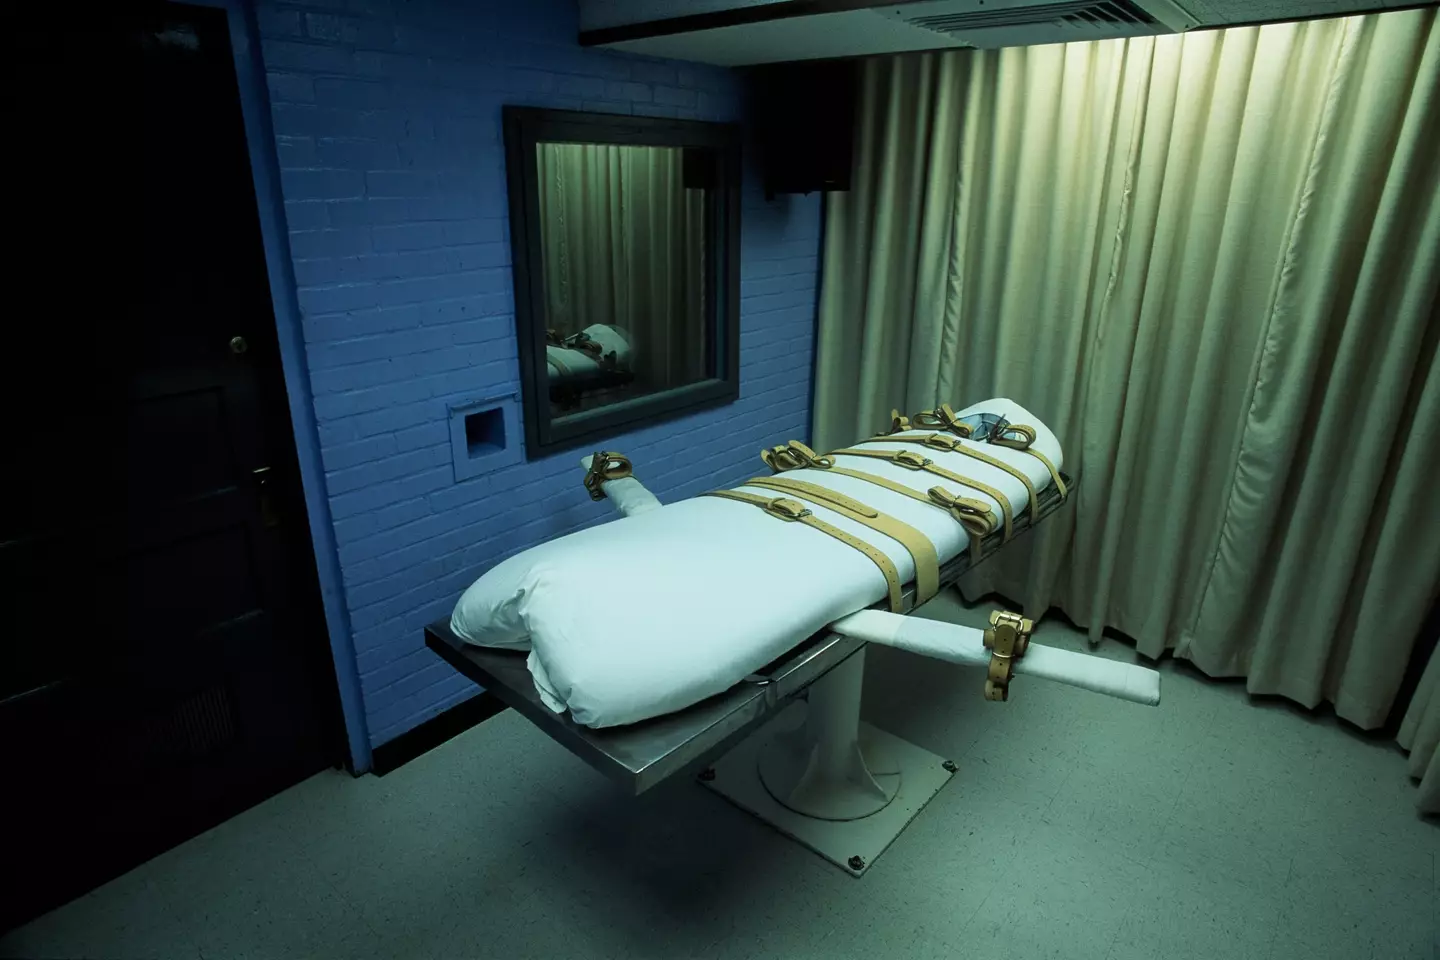 His lawyers argued he was 'intellectually disabled' but this did not stop his execution.